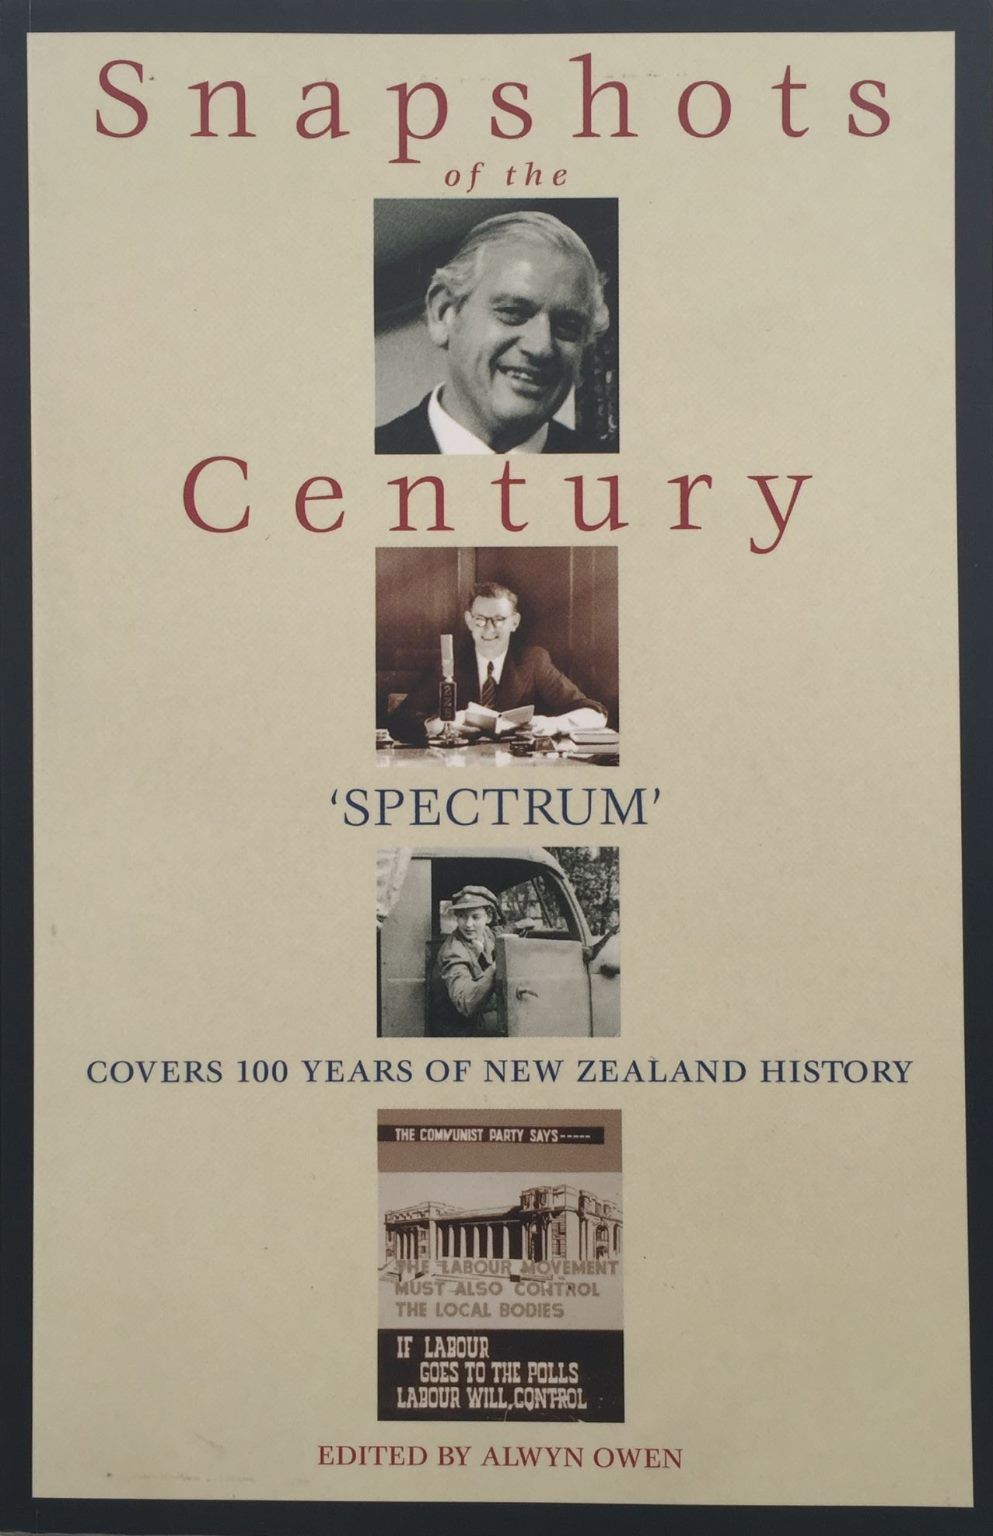 SNAPSHOTS OF THE CENTURY: Spectrum Covers 100 Years of New Zealand History